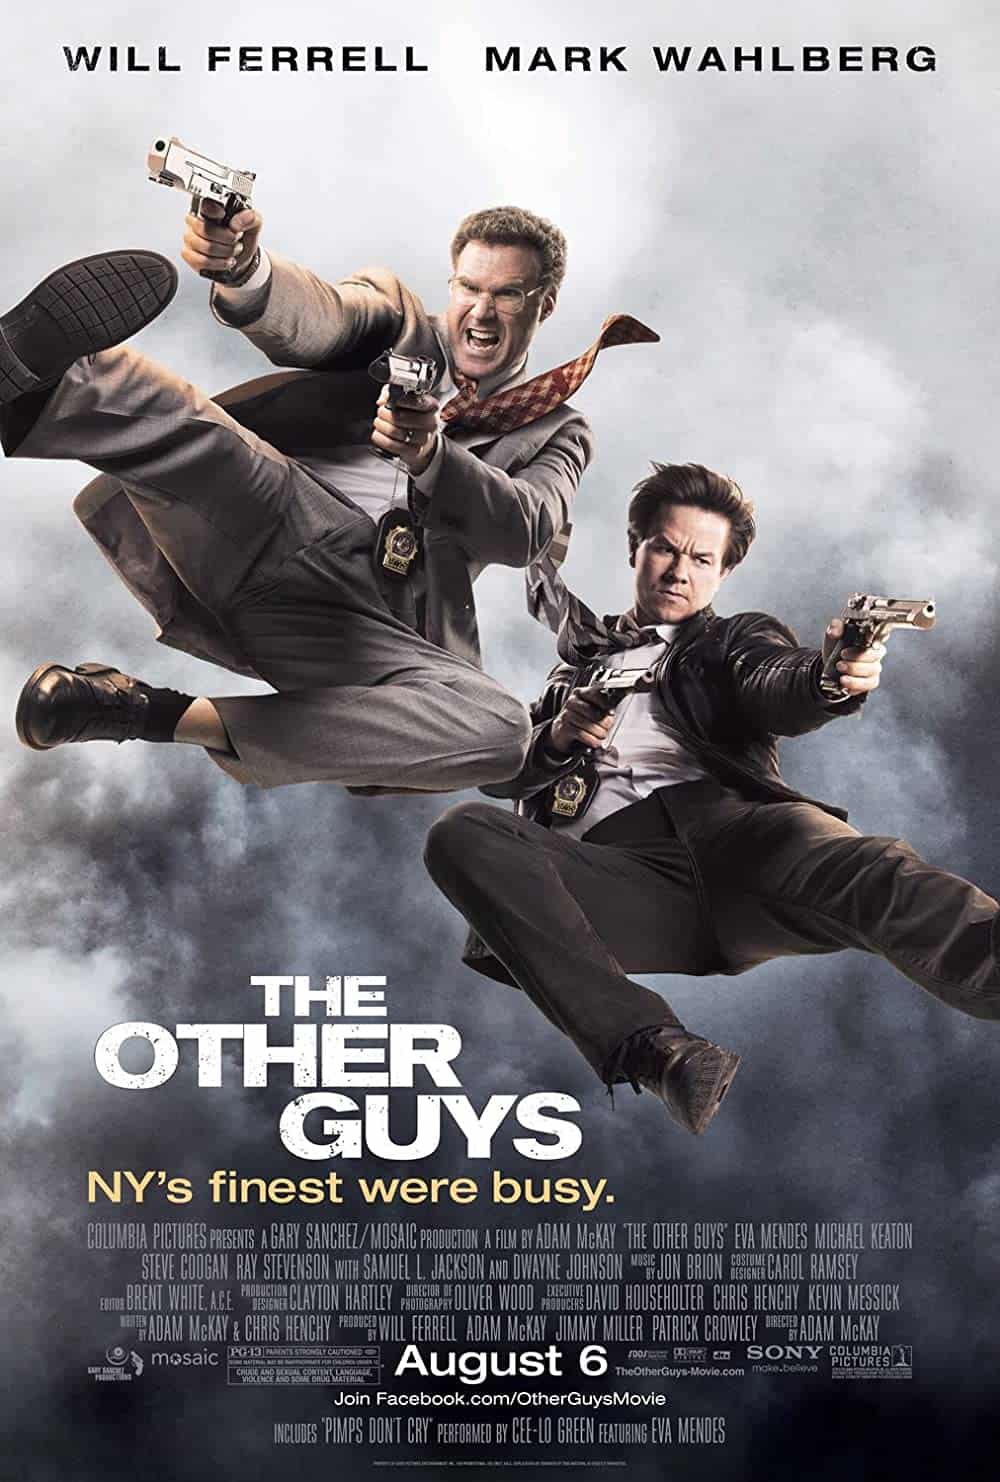 Best Will Ferrell Movies The Other Guys (2010)